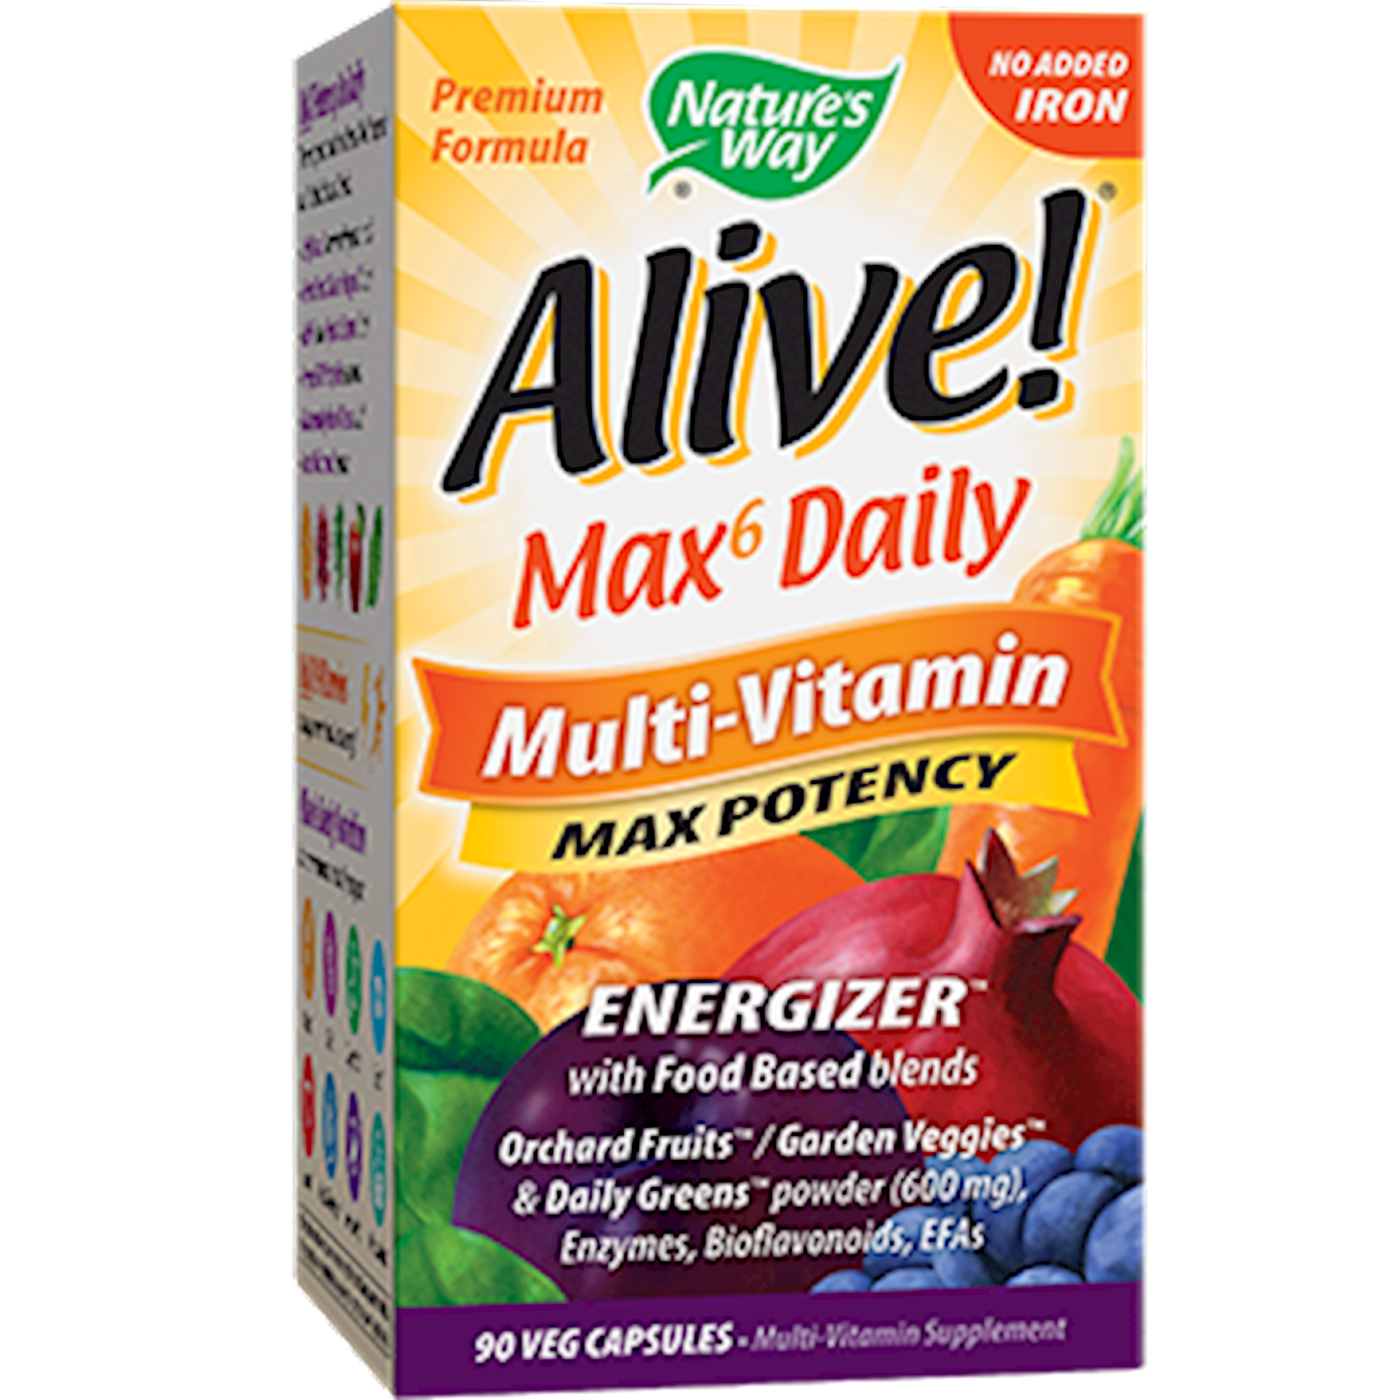 Alive! Max6 Daily (no iron) 90 vcaps Curated Wellness